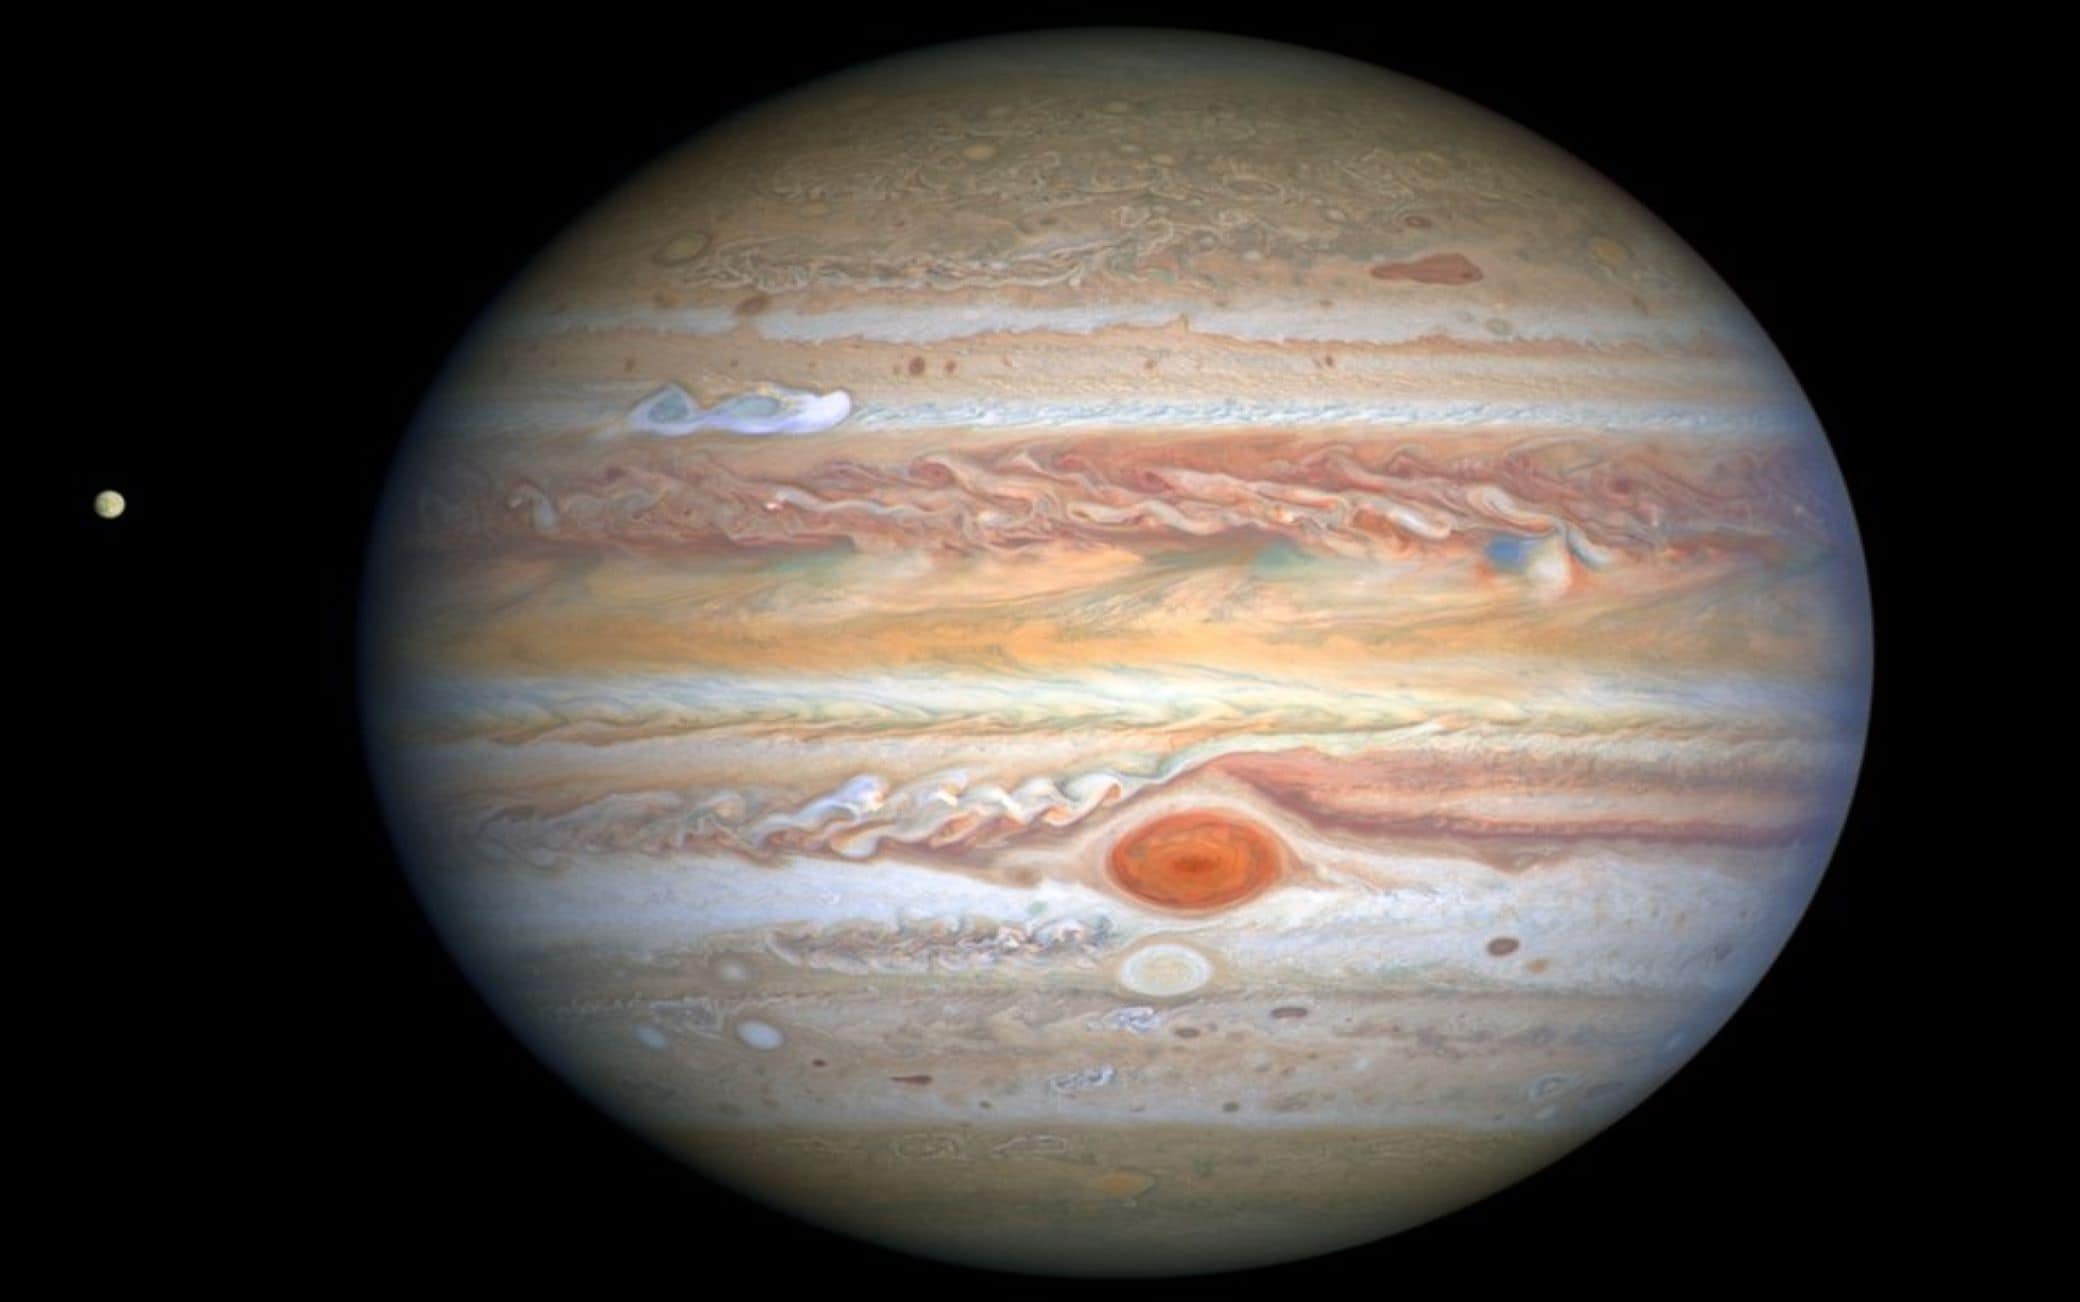 Jupiter “in opposition”, the planet will be visible to the naked eye: that’s when to observe it